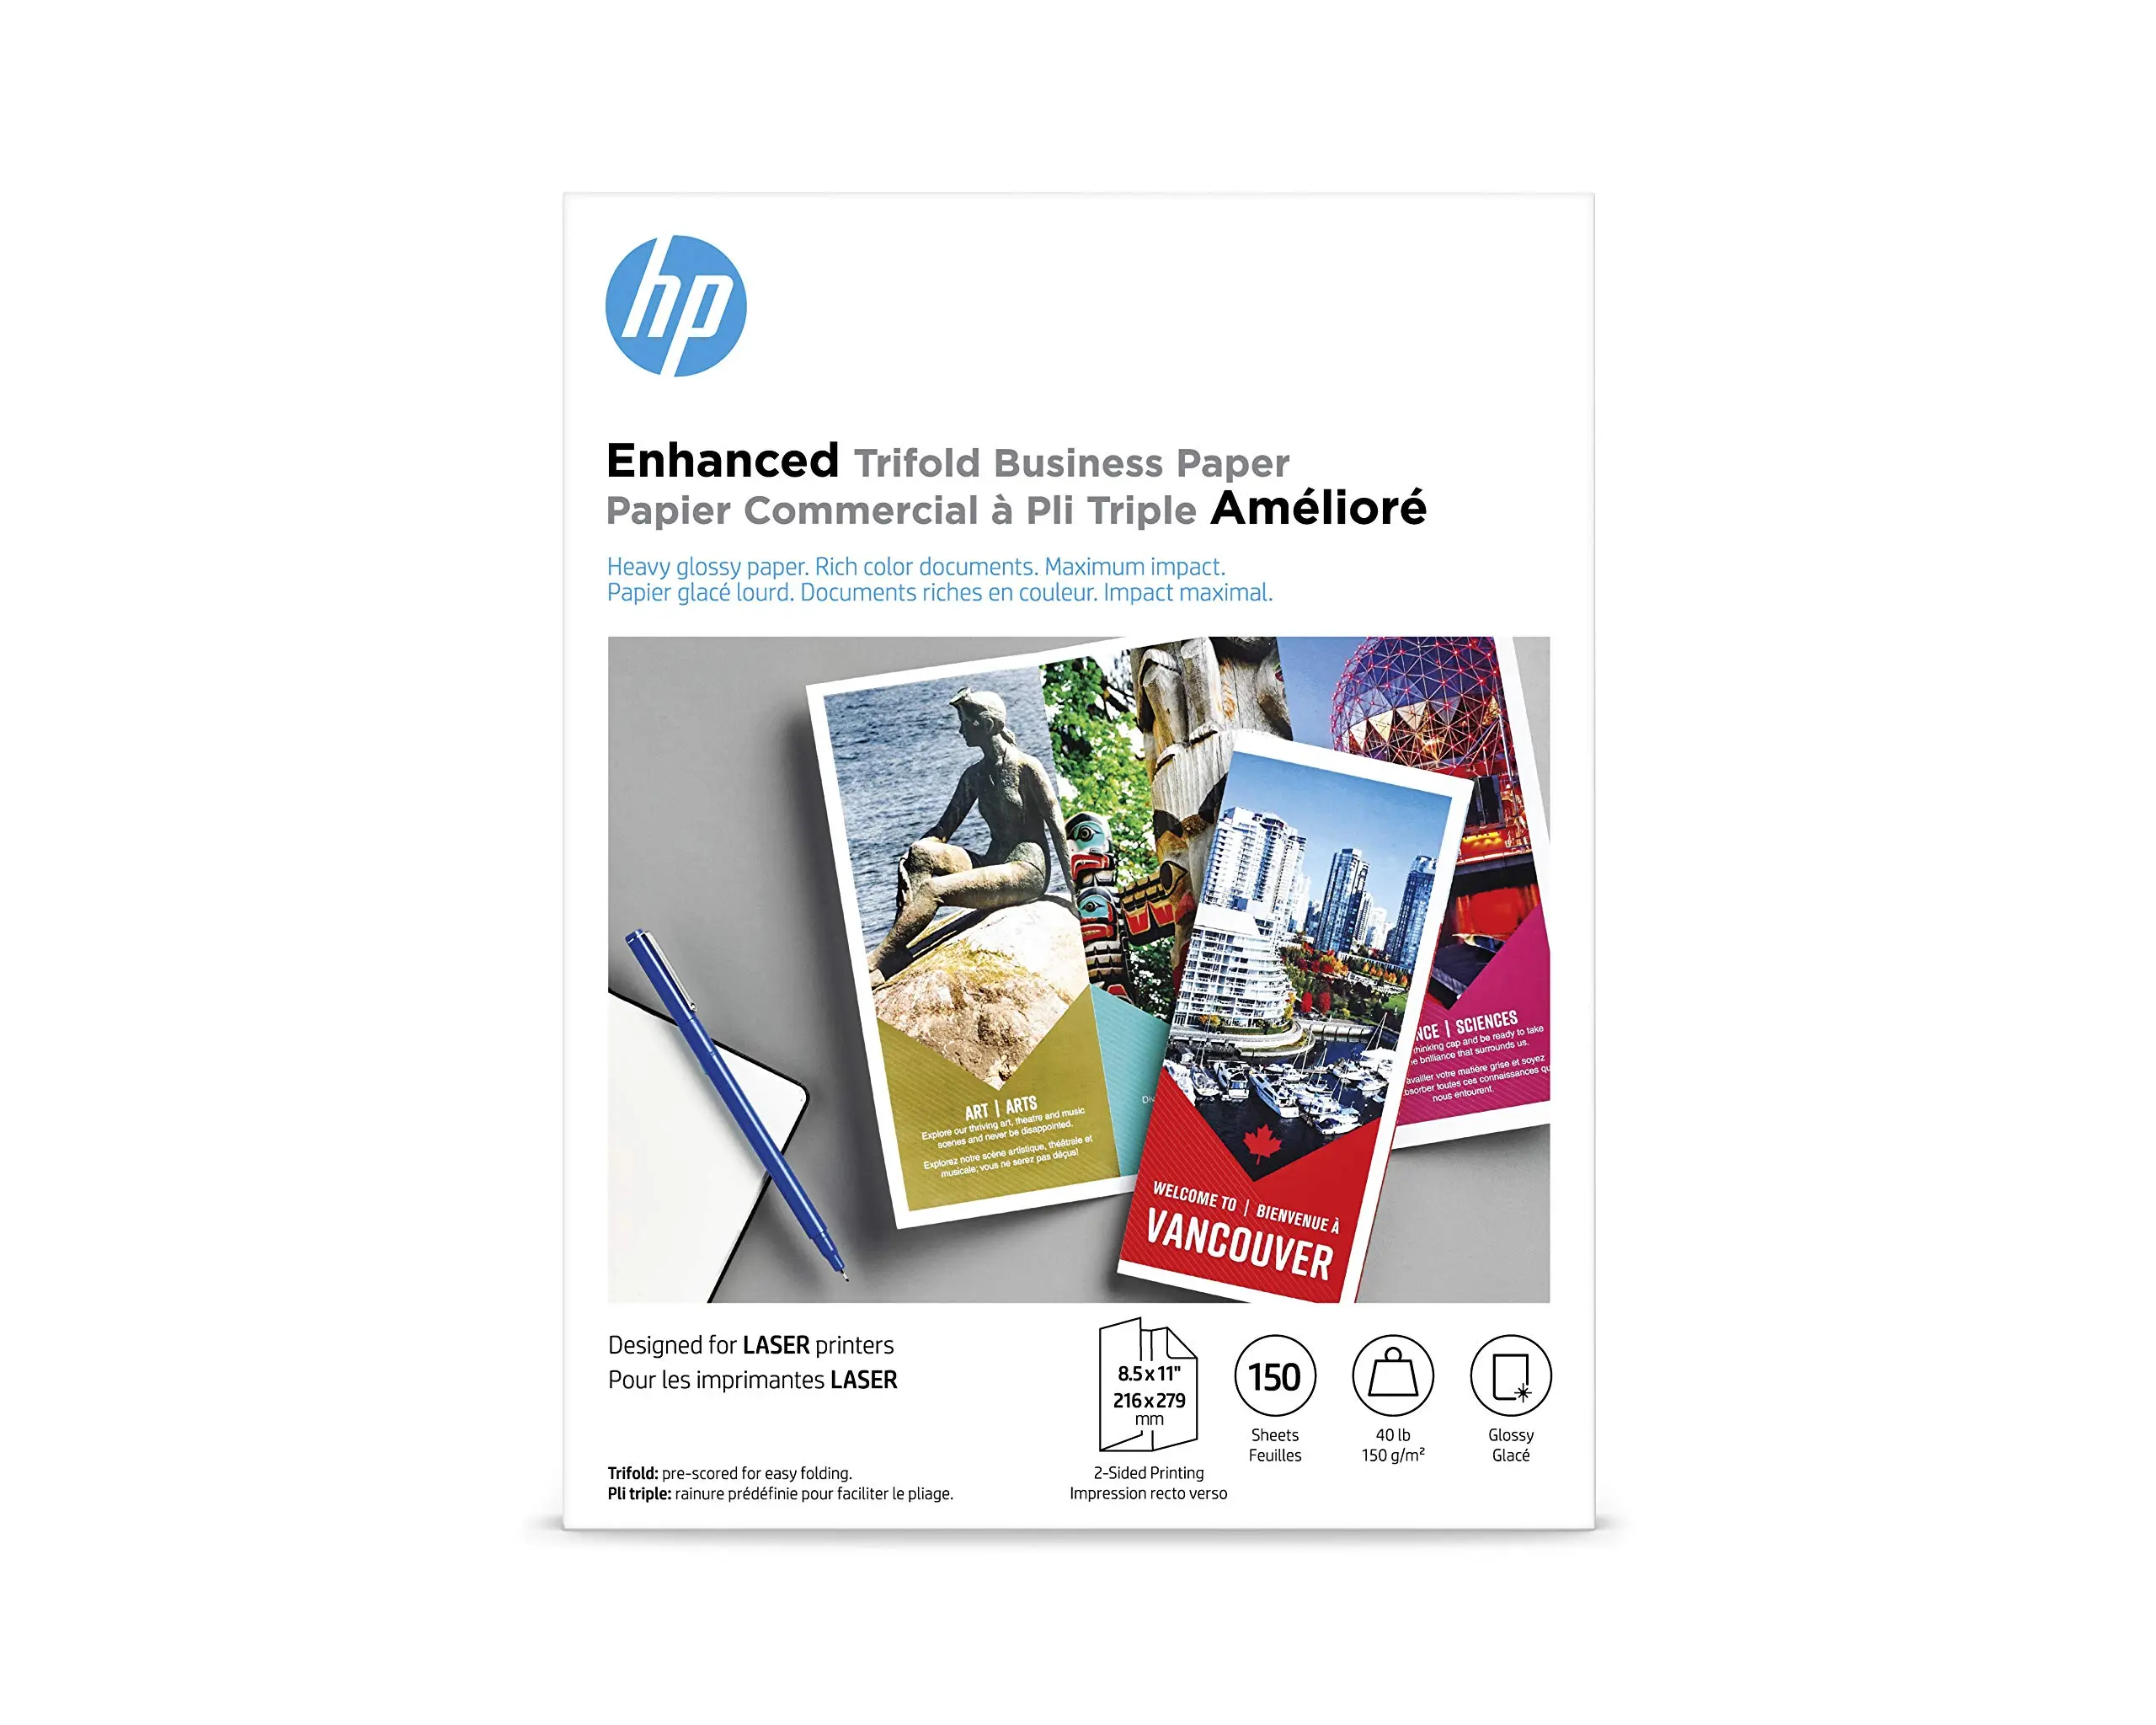 hewlett packard sample booklet wide format paper - How do I print like a book on my HP printer